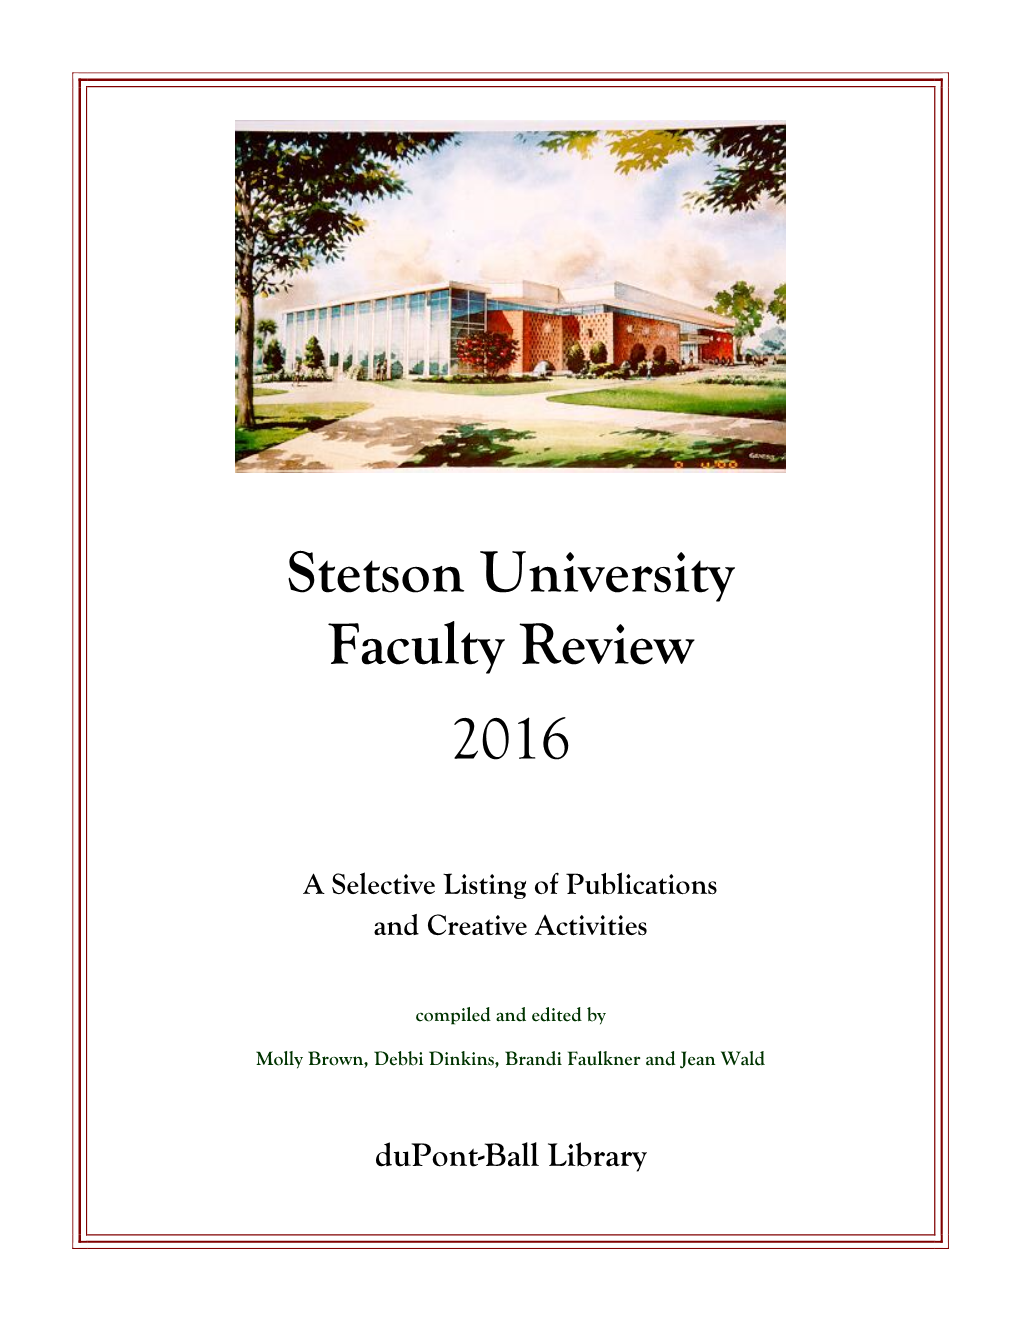 Faculty Review 2016